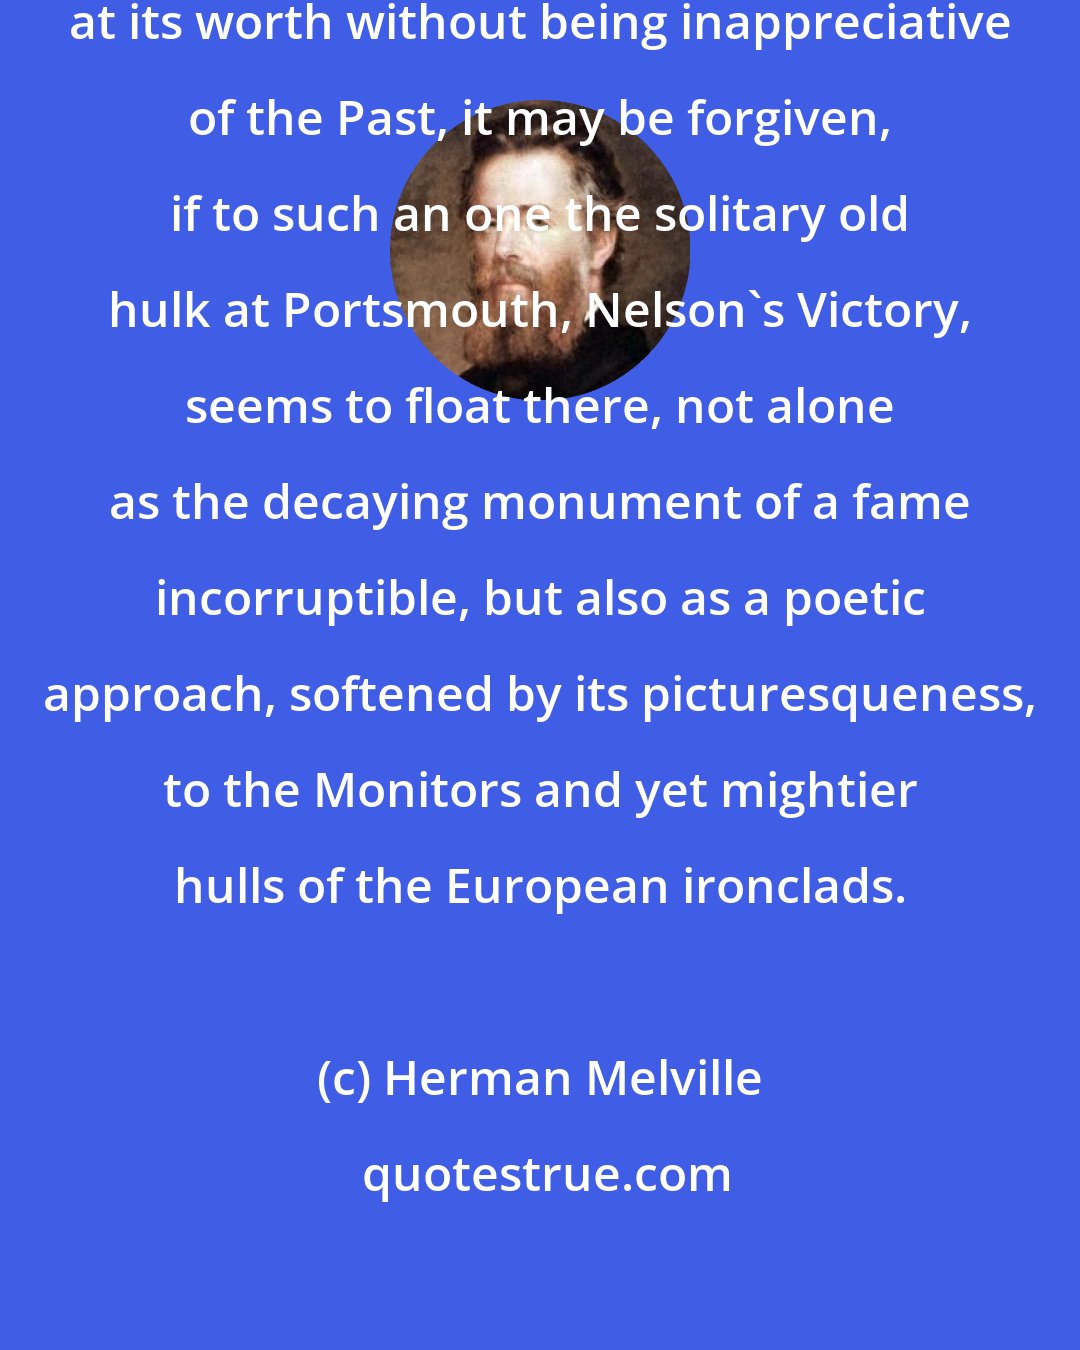 Herman Melville: To anybody who can hold the Present at its worth without being inappreciative of the Past, it may be forgiven, if to such an one the solitary old hulk at Portsmouth, Nelson's Victory, seems to float there, not alone as the decaying monument of a fame incorruptible, but also as a poetic approach, softened by its picturesqueness, to the Monitors and yet mightier hulls of the European ironclads.